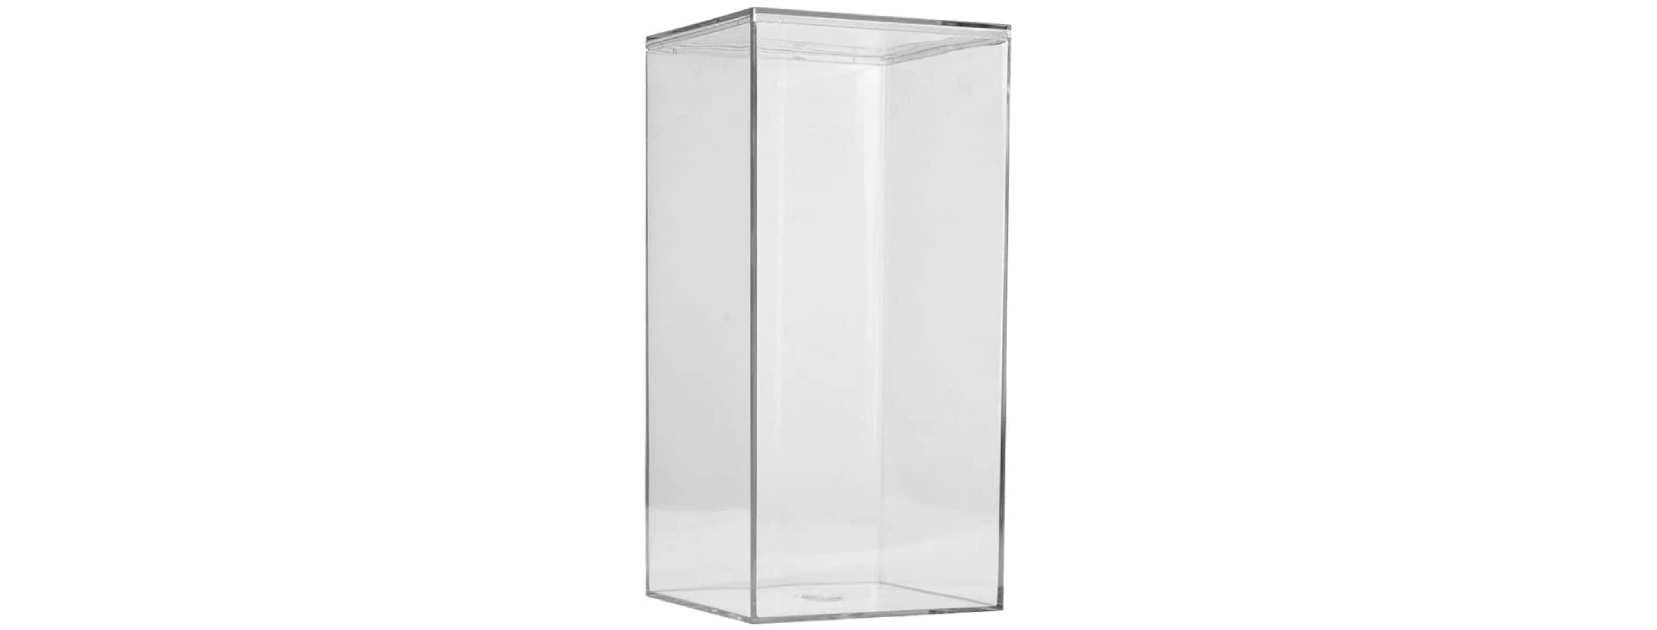 Hammont Acrylic Boxes - Clear Cubes (4 Pack) 3.15x3.15x3.15 | Small Lucite  Boxes with Hinged Lids, for Displays, Gifts, Weddings, Jewlery, Parties